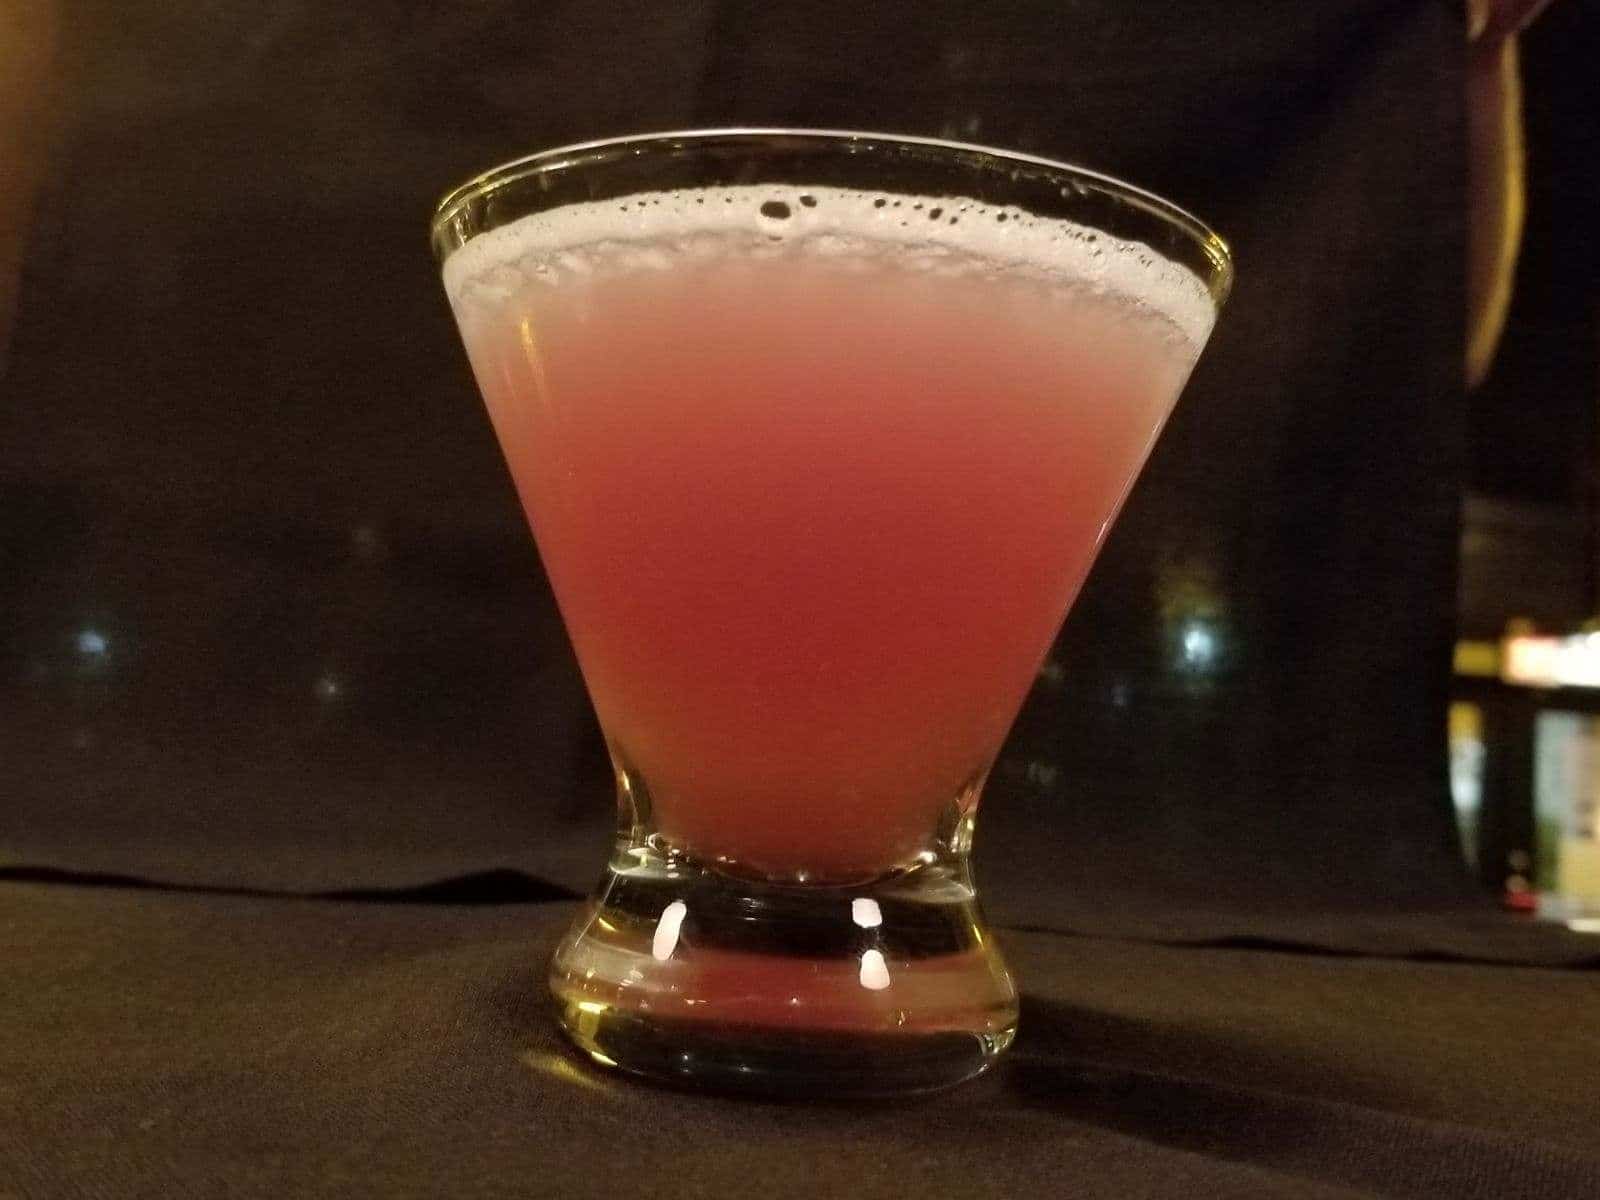 Mele Kalikimaka 12 holiday cocktails and where to find them in Birmingham